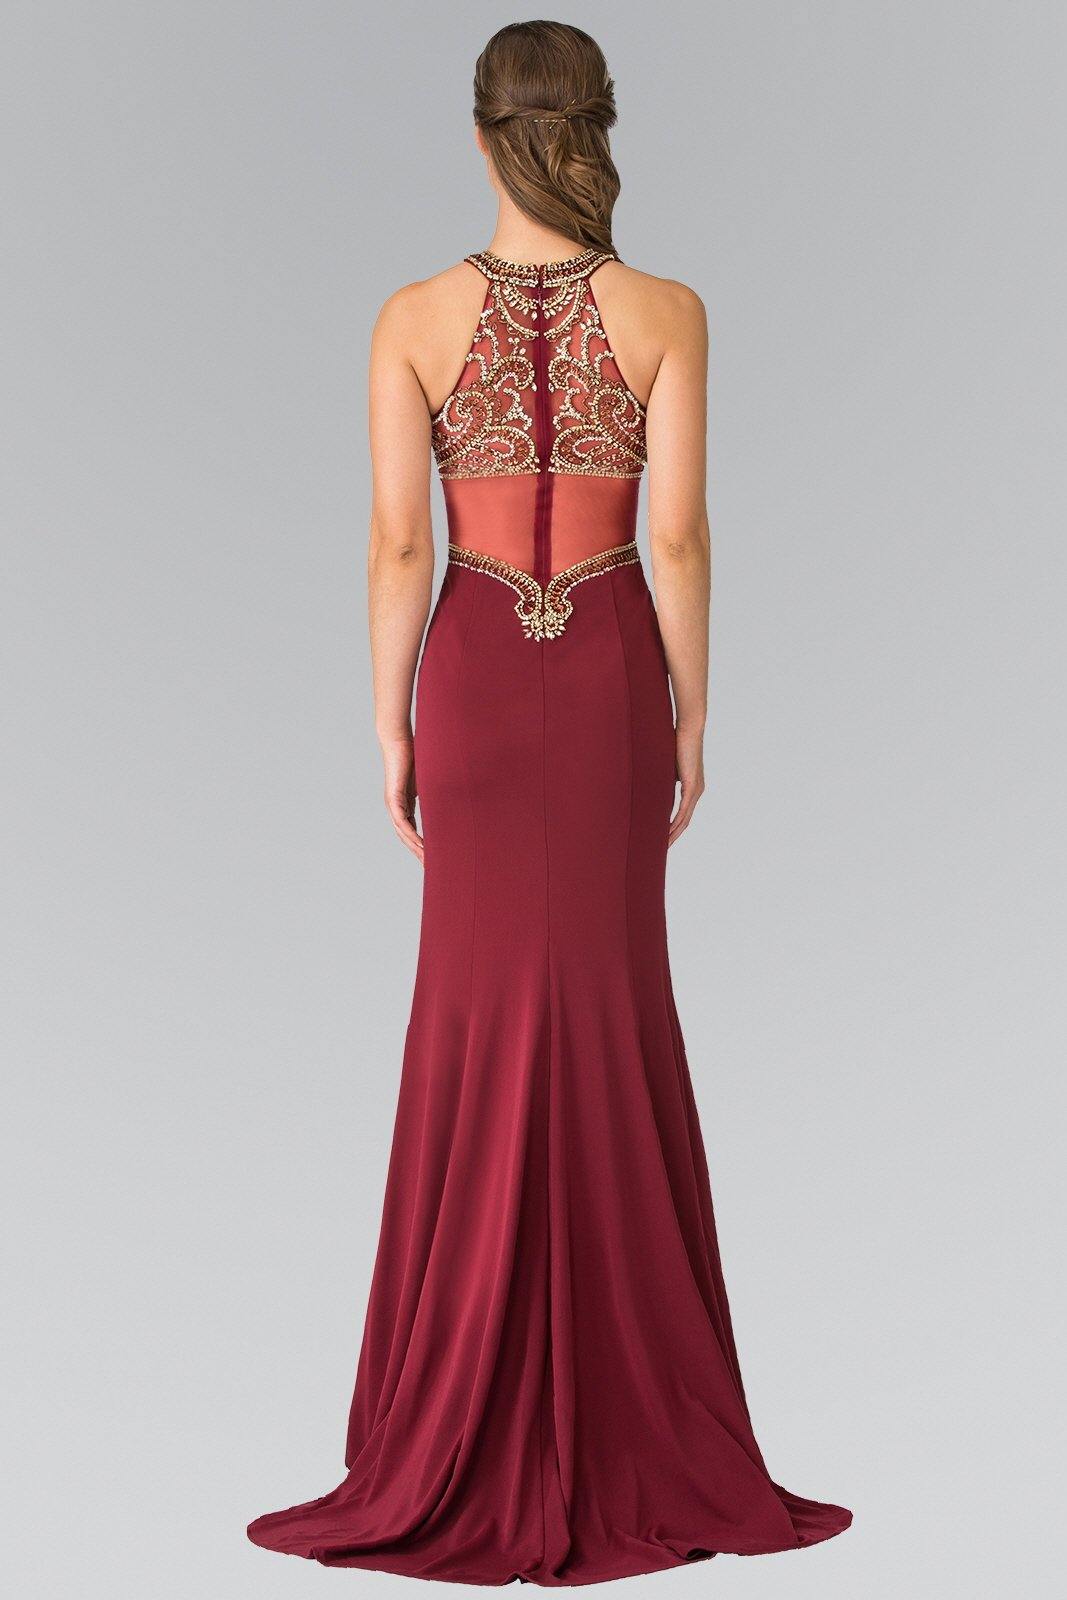 Long Prom Dress with Sheer Back Fitted - The Dress Outlet Elizabeth K